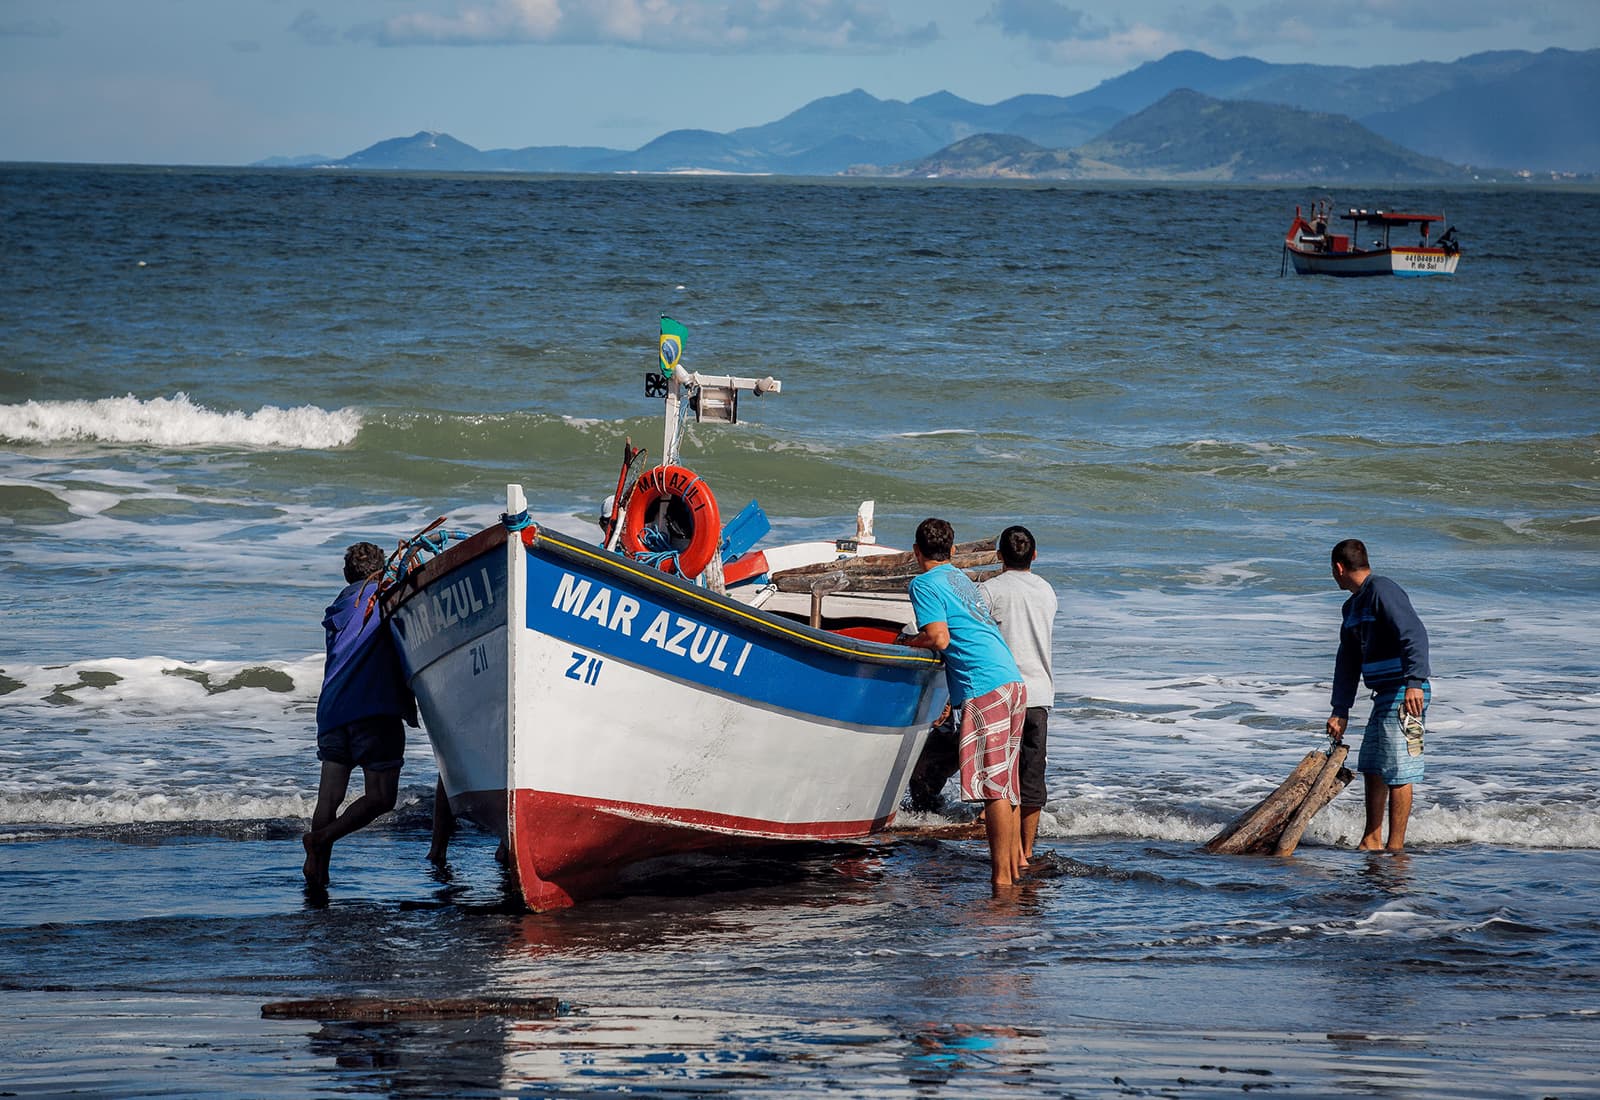 Fishermen in Fortaleza, Brazil stand on the shore by their boat. Photo credit: Bento Viana Photography